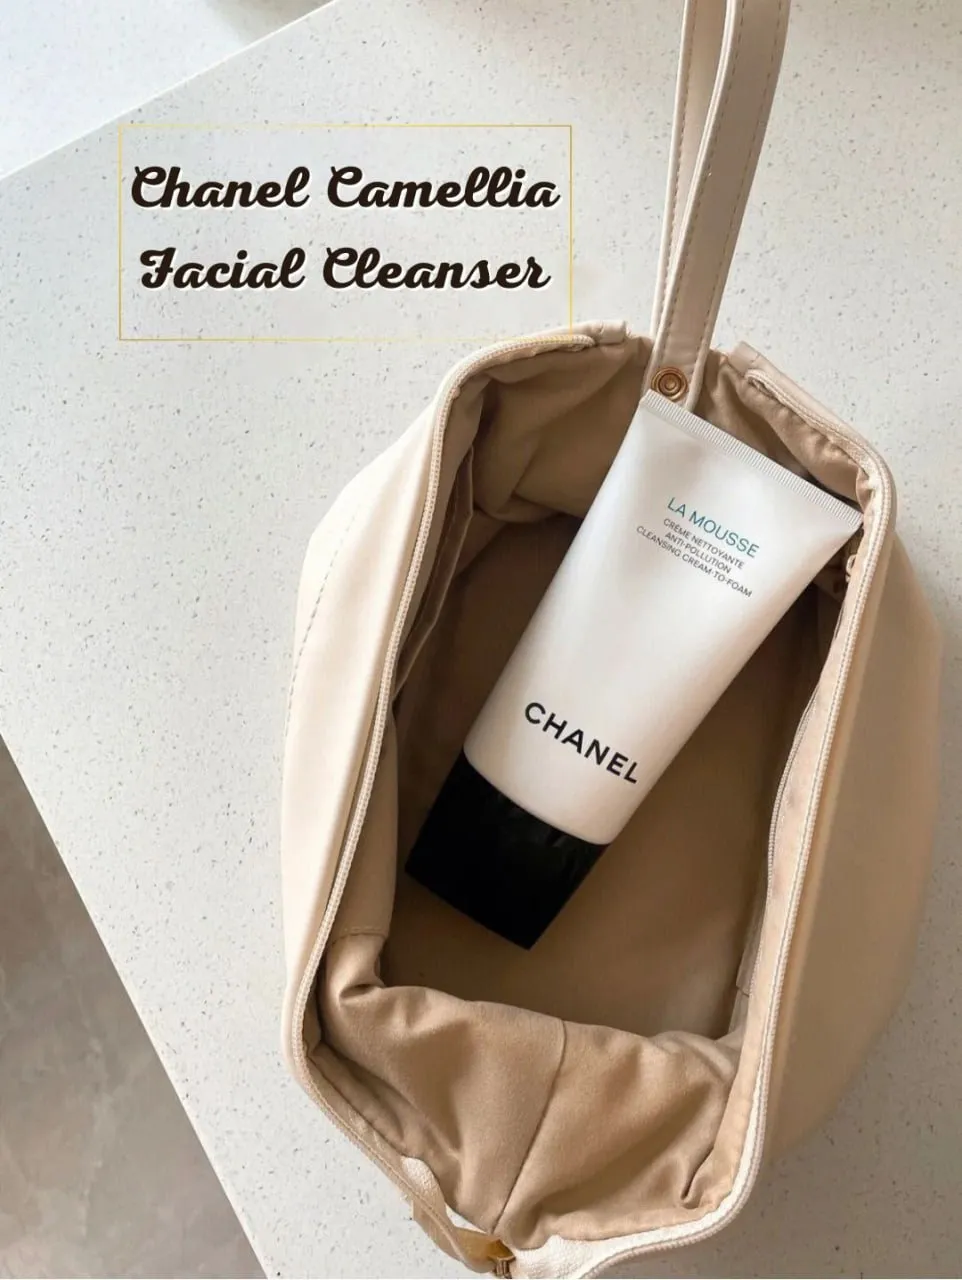 Chanel, Skin Care Diary 👩🏻‍🦱, Gallery posted by Wendy Cole 🤷🏻